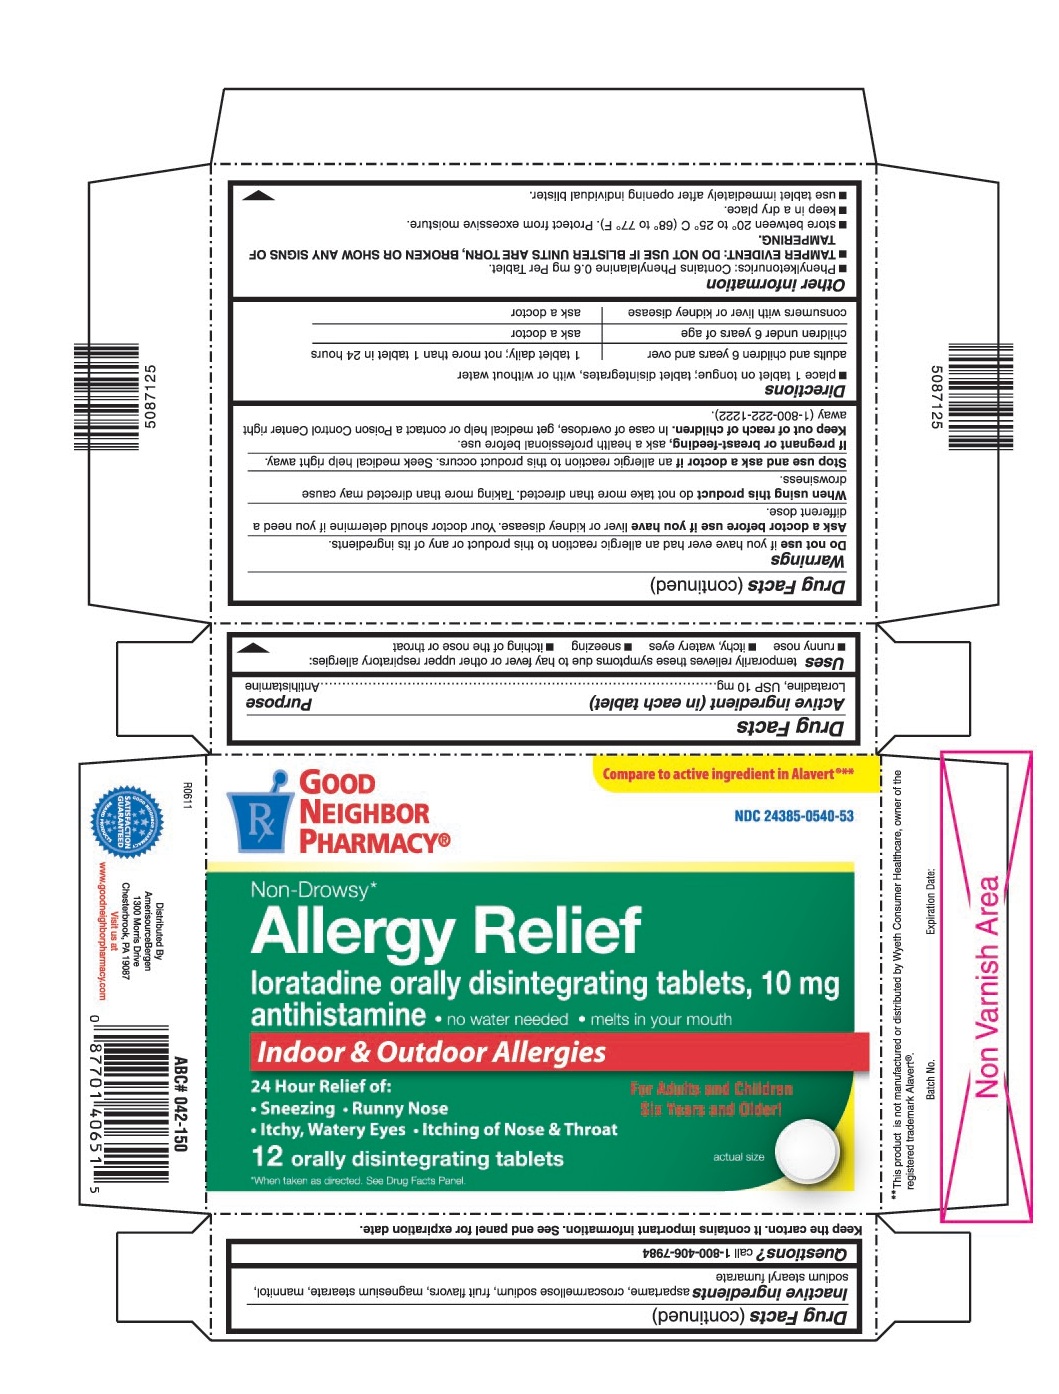 This is the blister carton label for 12 count Loratadine ODT for Good Neighbor Pharmacy.